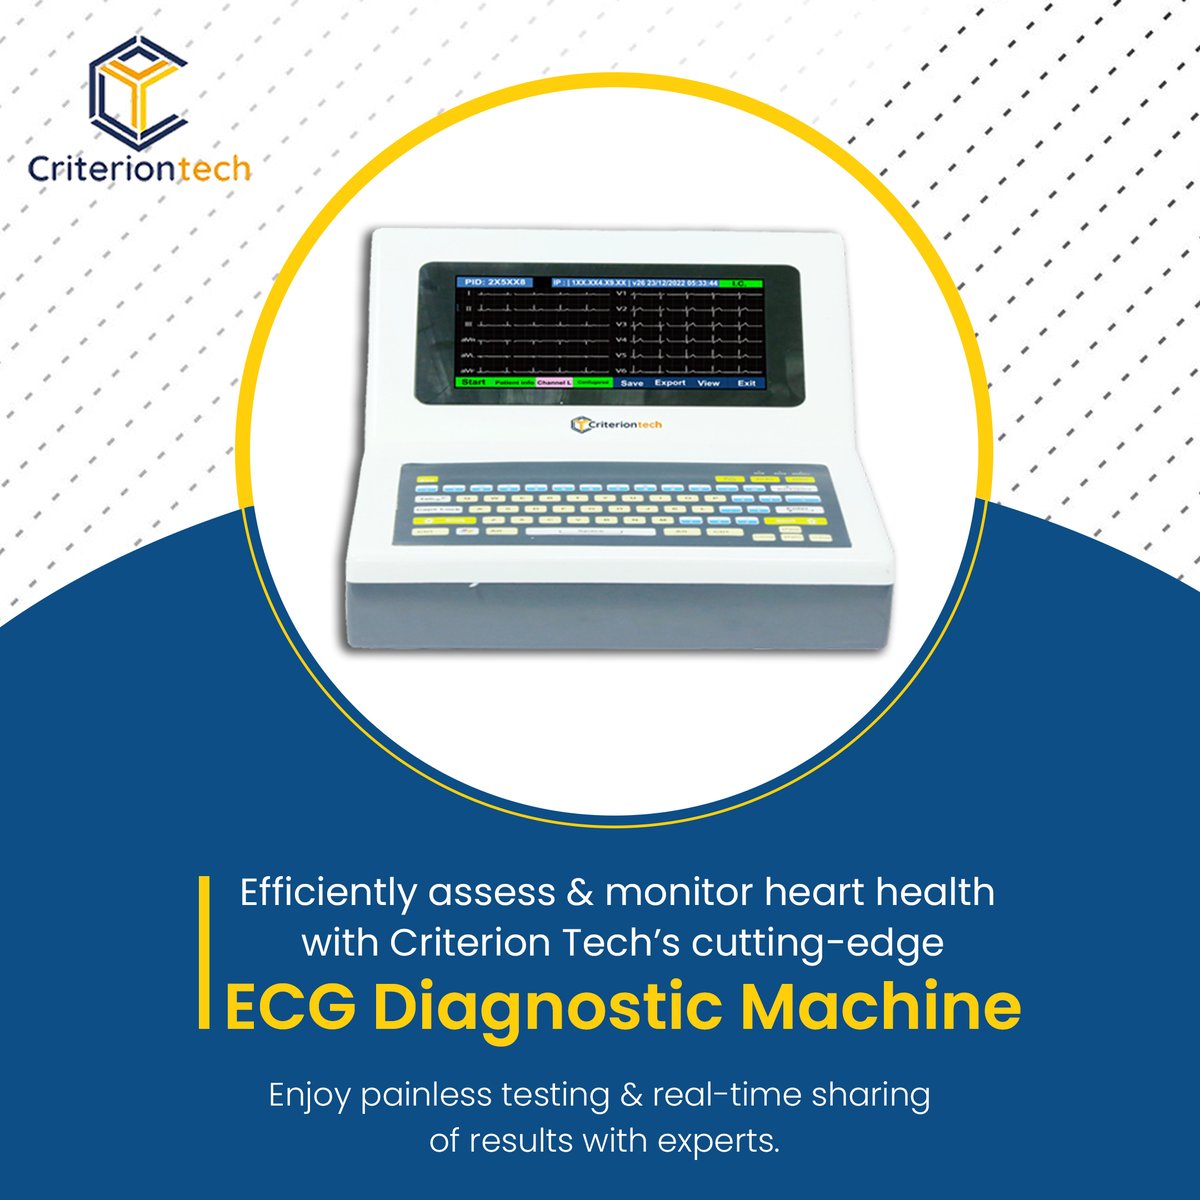 Experience painless testing and seamless real-time sharing with experts.

Learn more at: criteriontechnologies.com/ecg-machine.ht…
.
#ECGDiagnostic #HeartHealth #MedicalTechnology #RealTimeMonitoring #HealthcareInnovation #PainlessTesting #ExpertConsultation #Criteria4Technology #CriterionTech